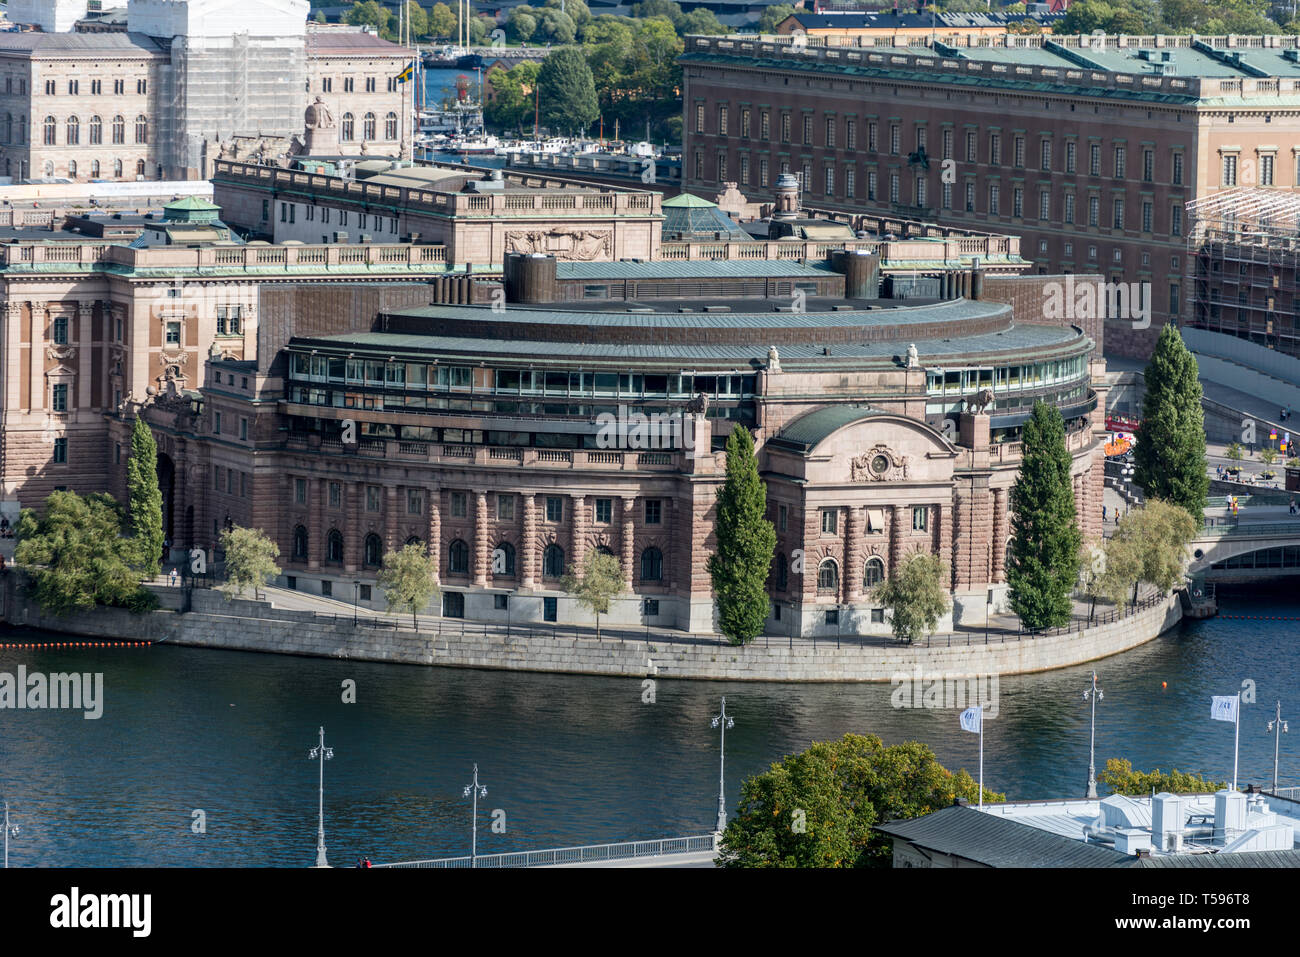 The Swedish Parliament Building (Riksdagshuset) designed by Aron Johansson in the Neoclassical style. Stock Photo